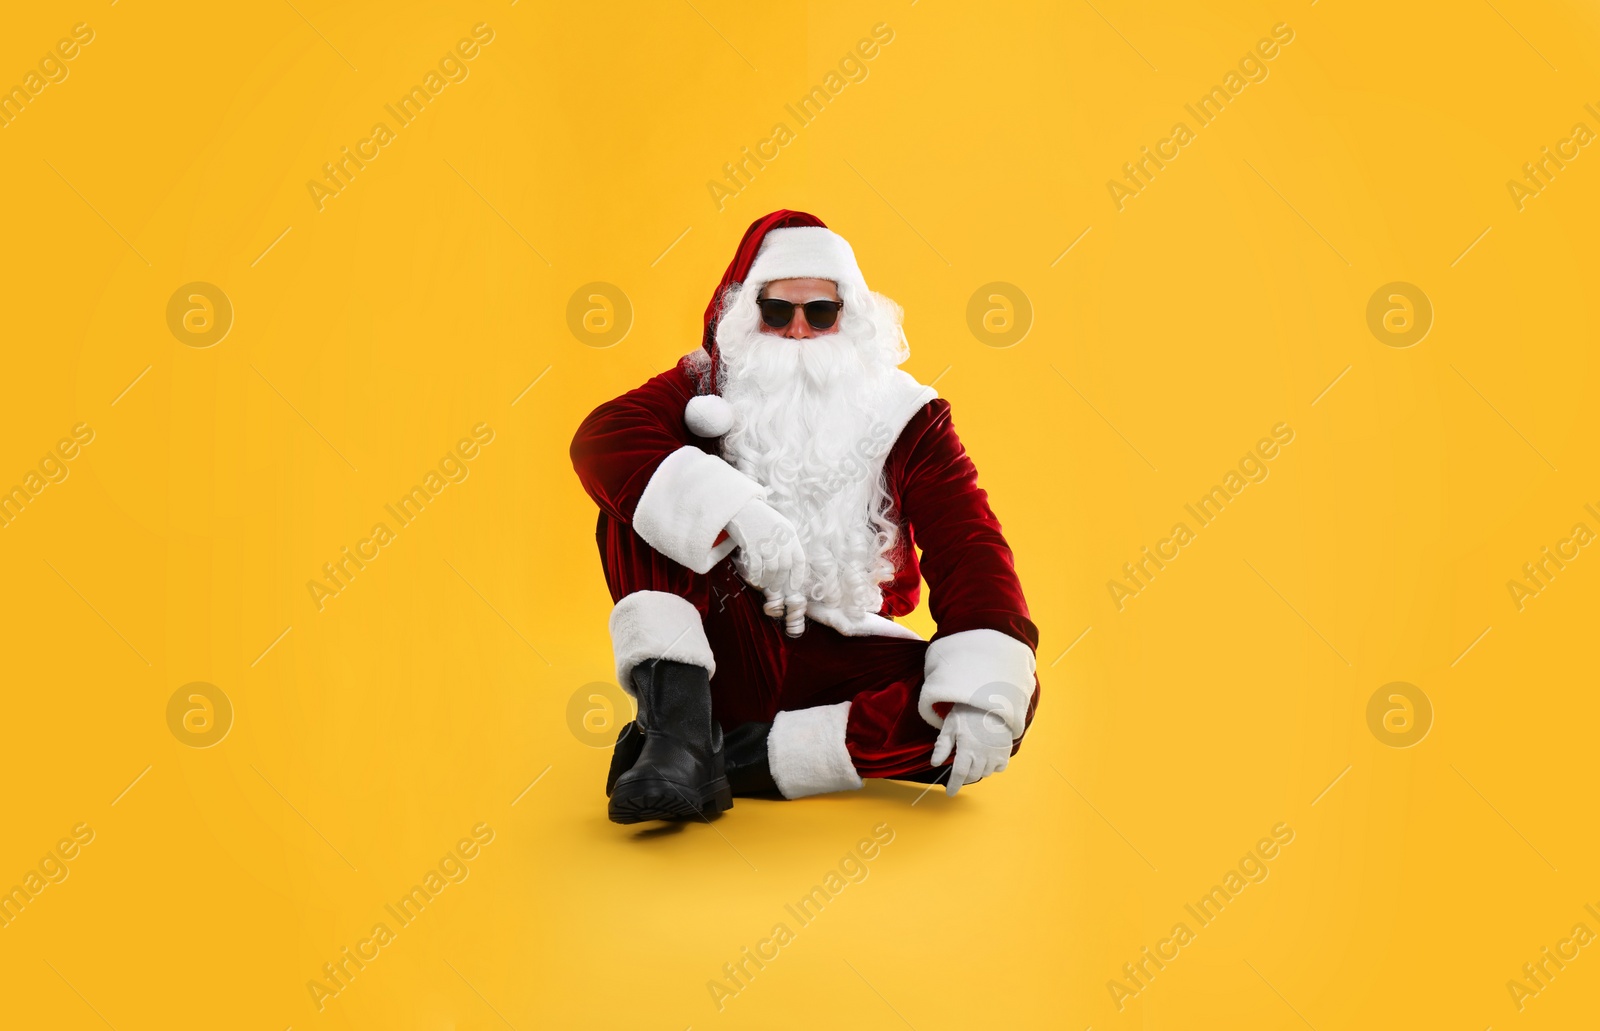 Photo of Santa Claus with sunglasses on yellow background